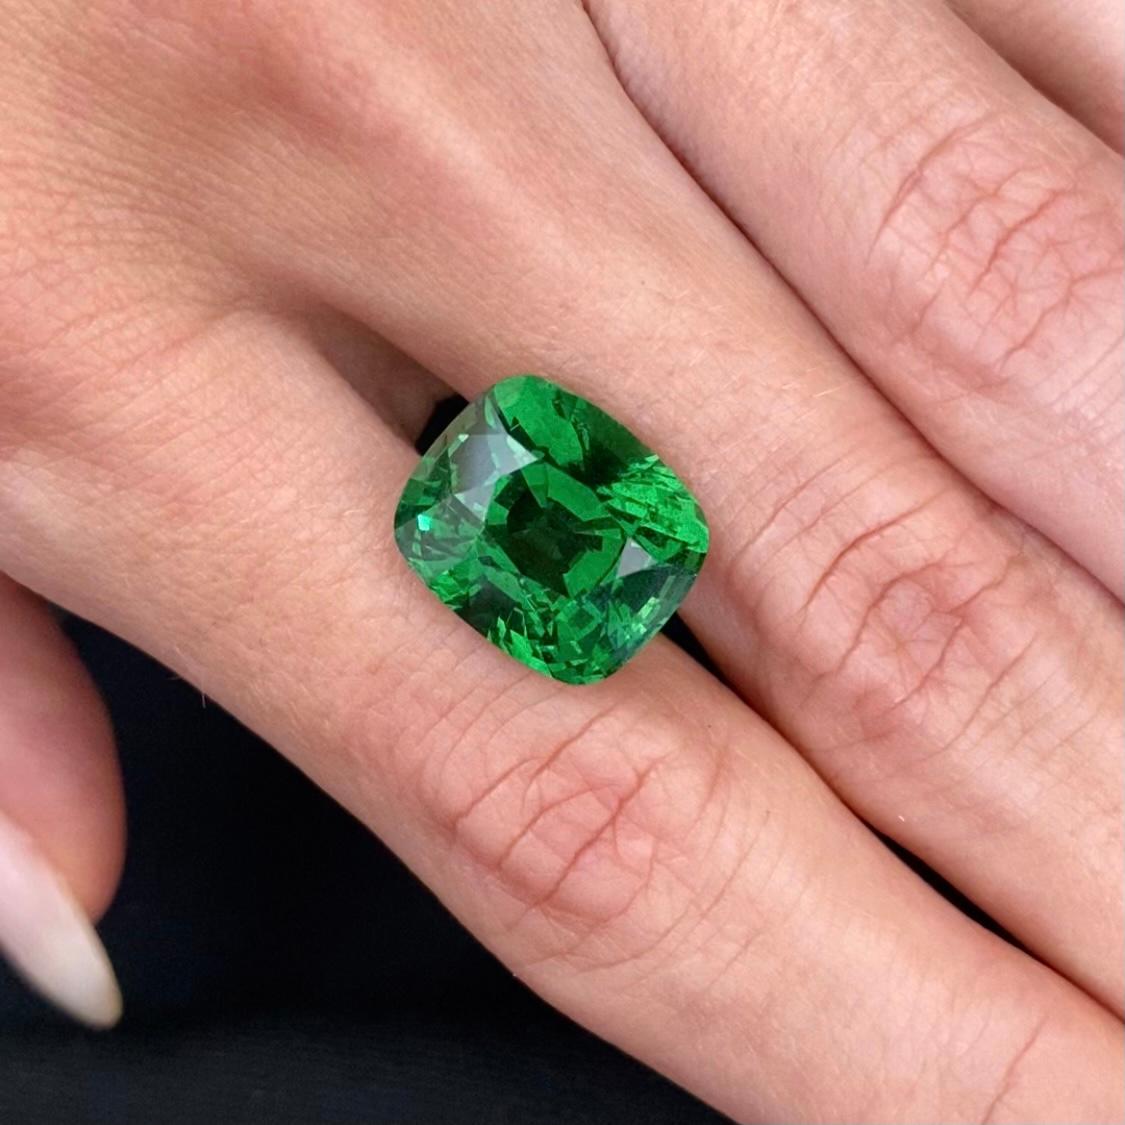 Tsavorite is a rare variety of garnet mineral, top grade tsavorites usually have extraordinary neon-green hue and excellent luster. It could be mainly found only in 2 places in the world - in Africa between Kenia and Tanzania and in Madagascar.